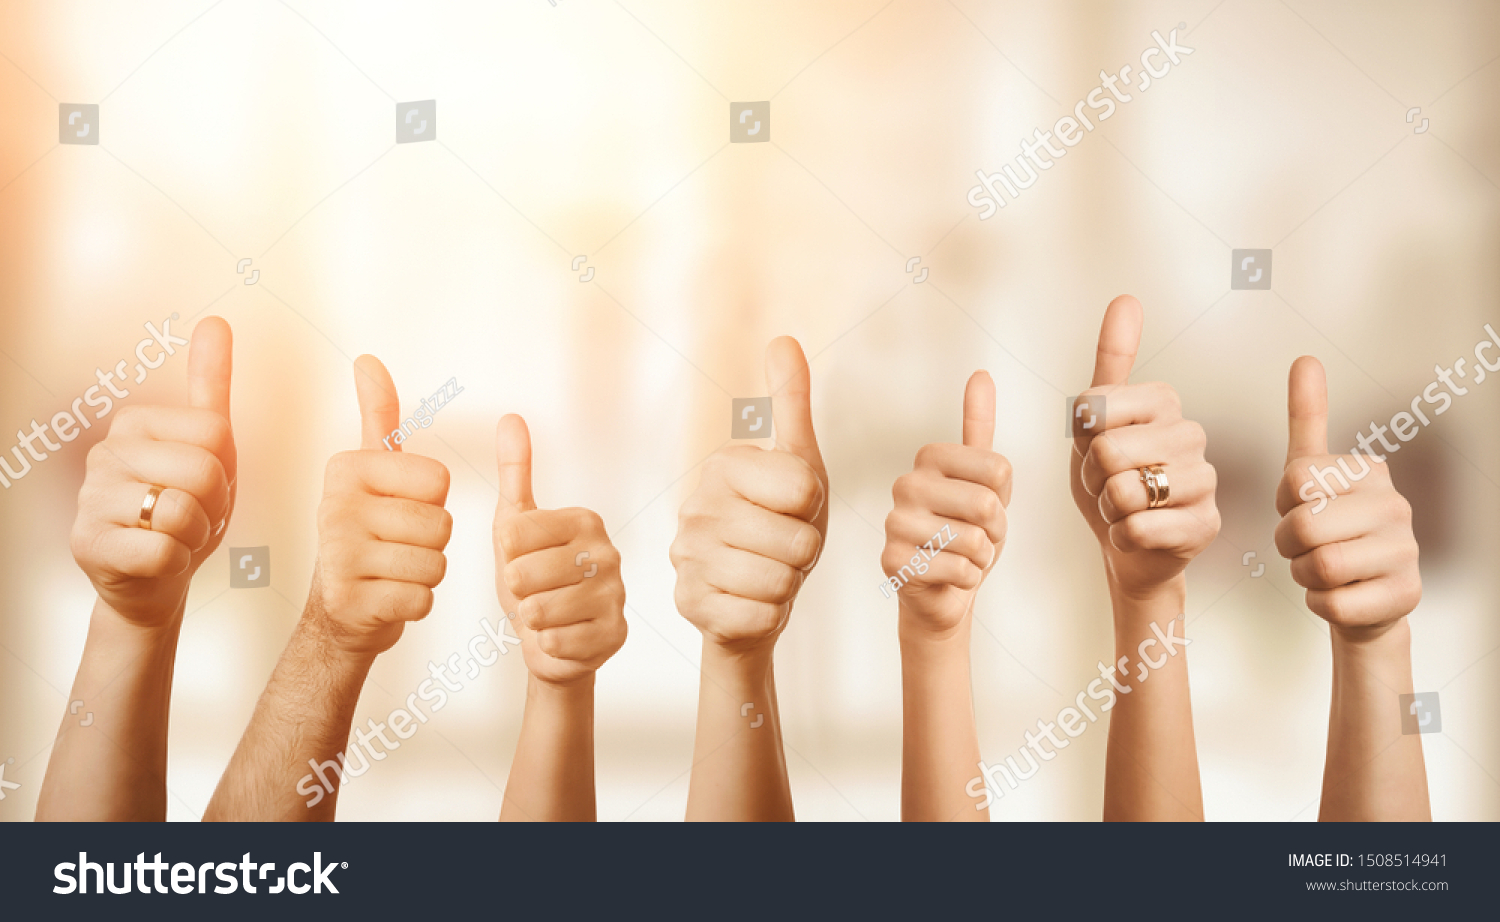 Close up of group of hands showing thumbs up over defocused background with copy space #1508514941